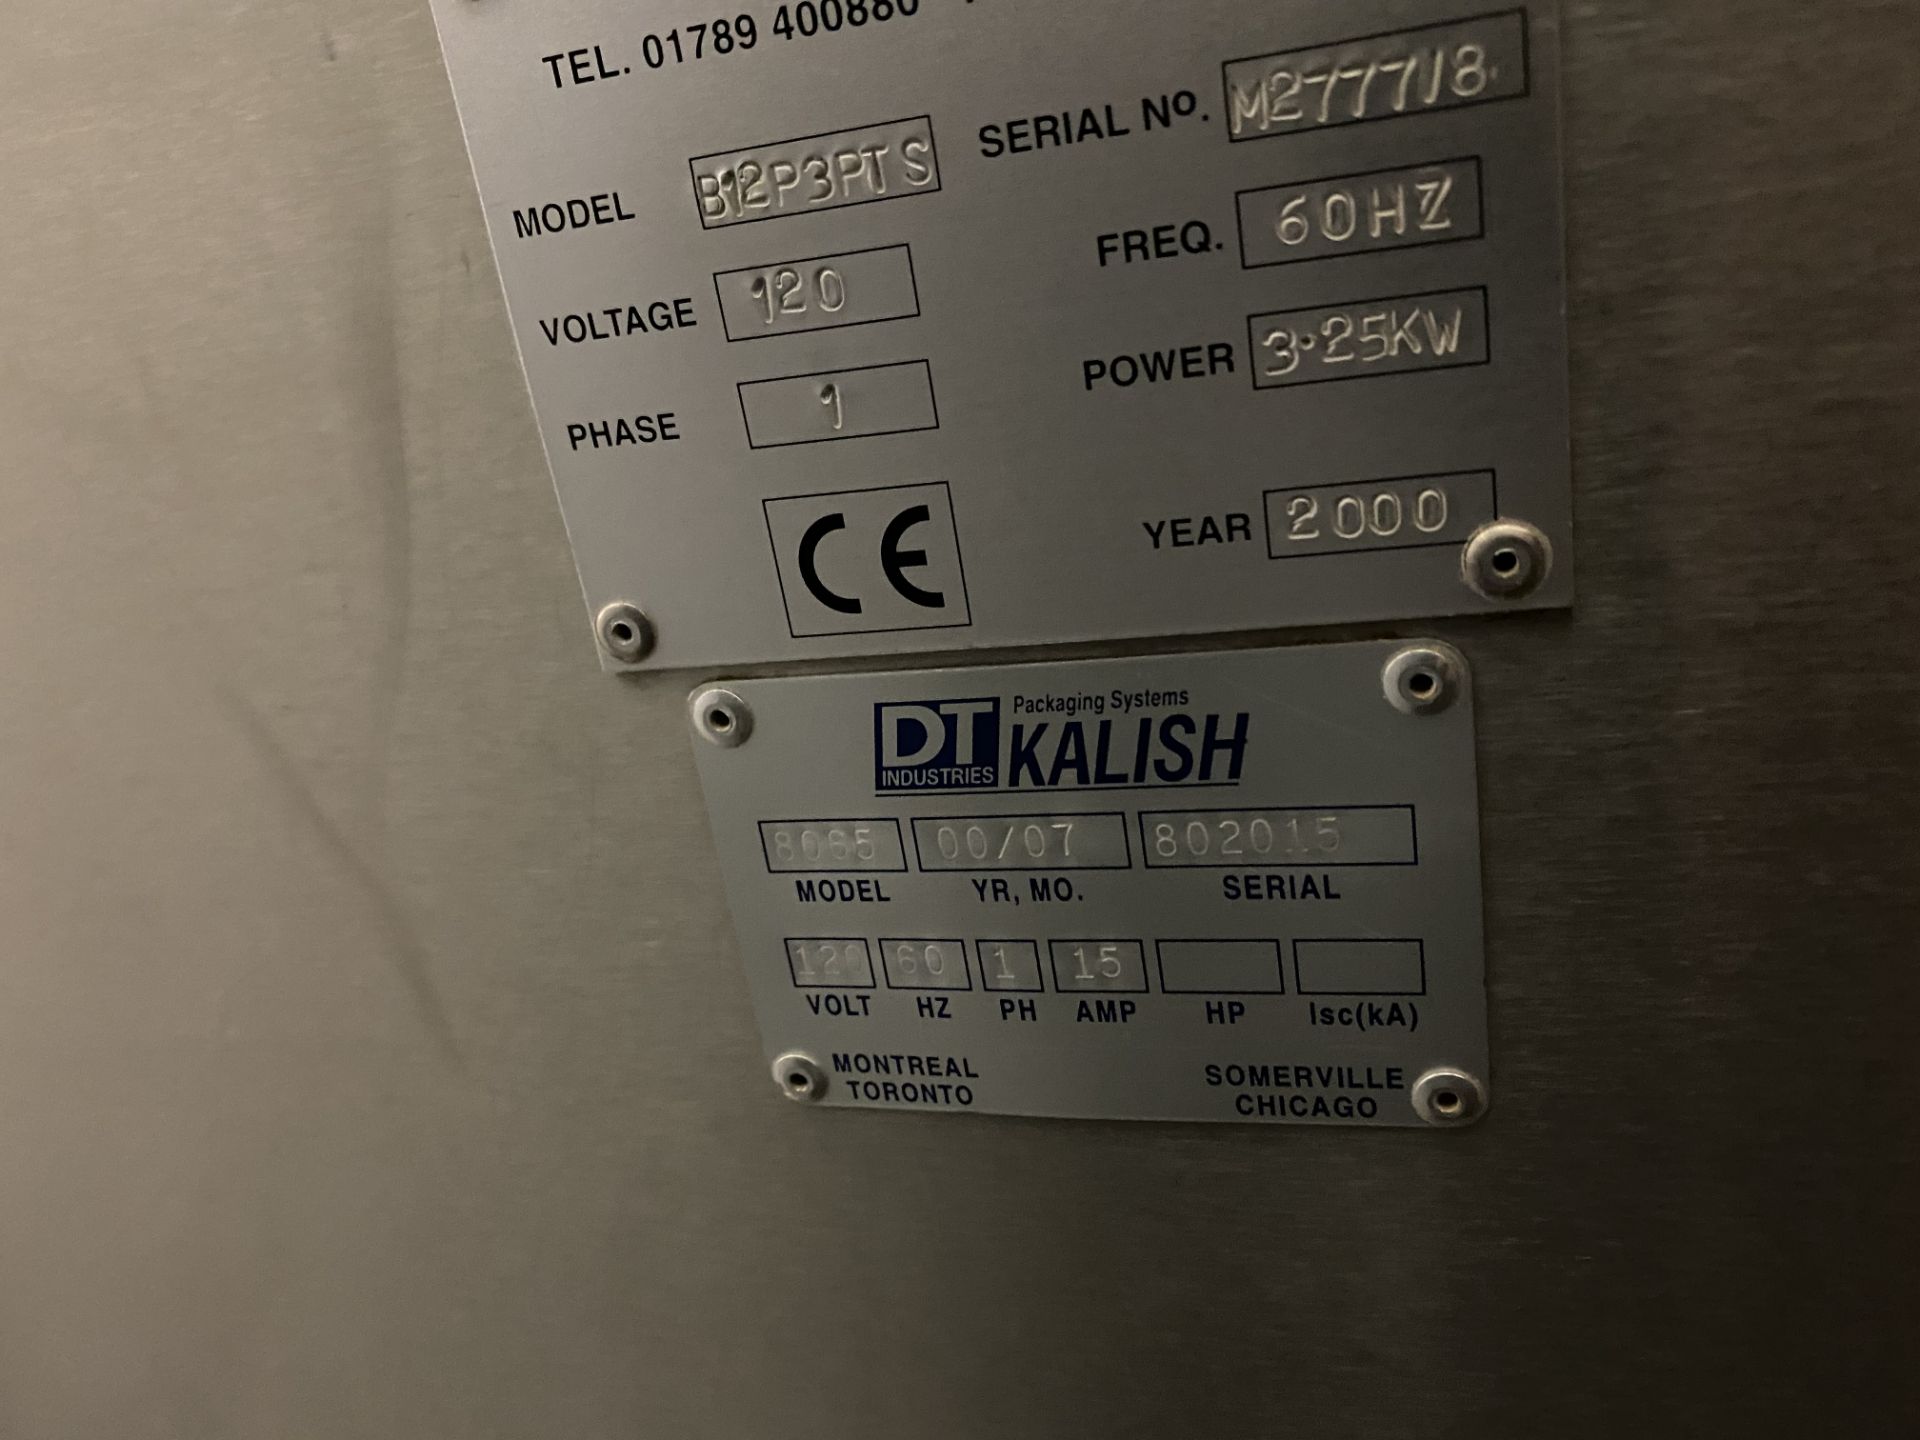 DT Industries Kalish 8005 sn 802010 (Swiftpack Automation Model S12P3PTS sn M2777/8), 120V,1ph, 60Hz - Image 13 of 23